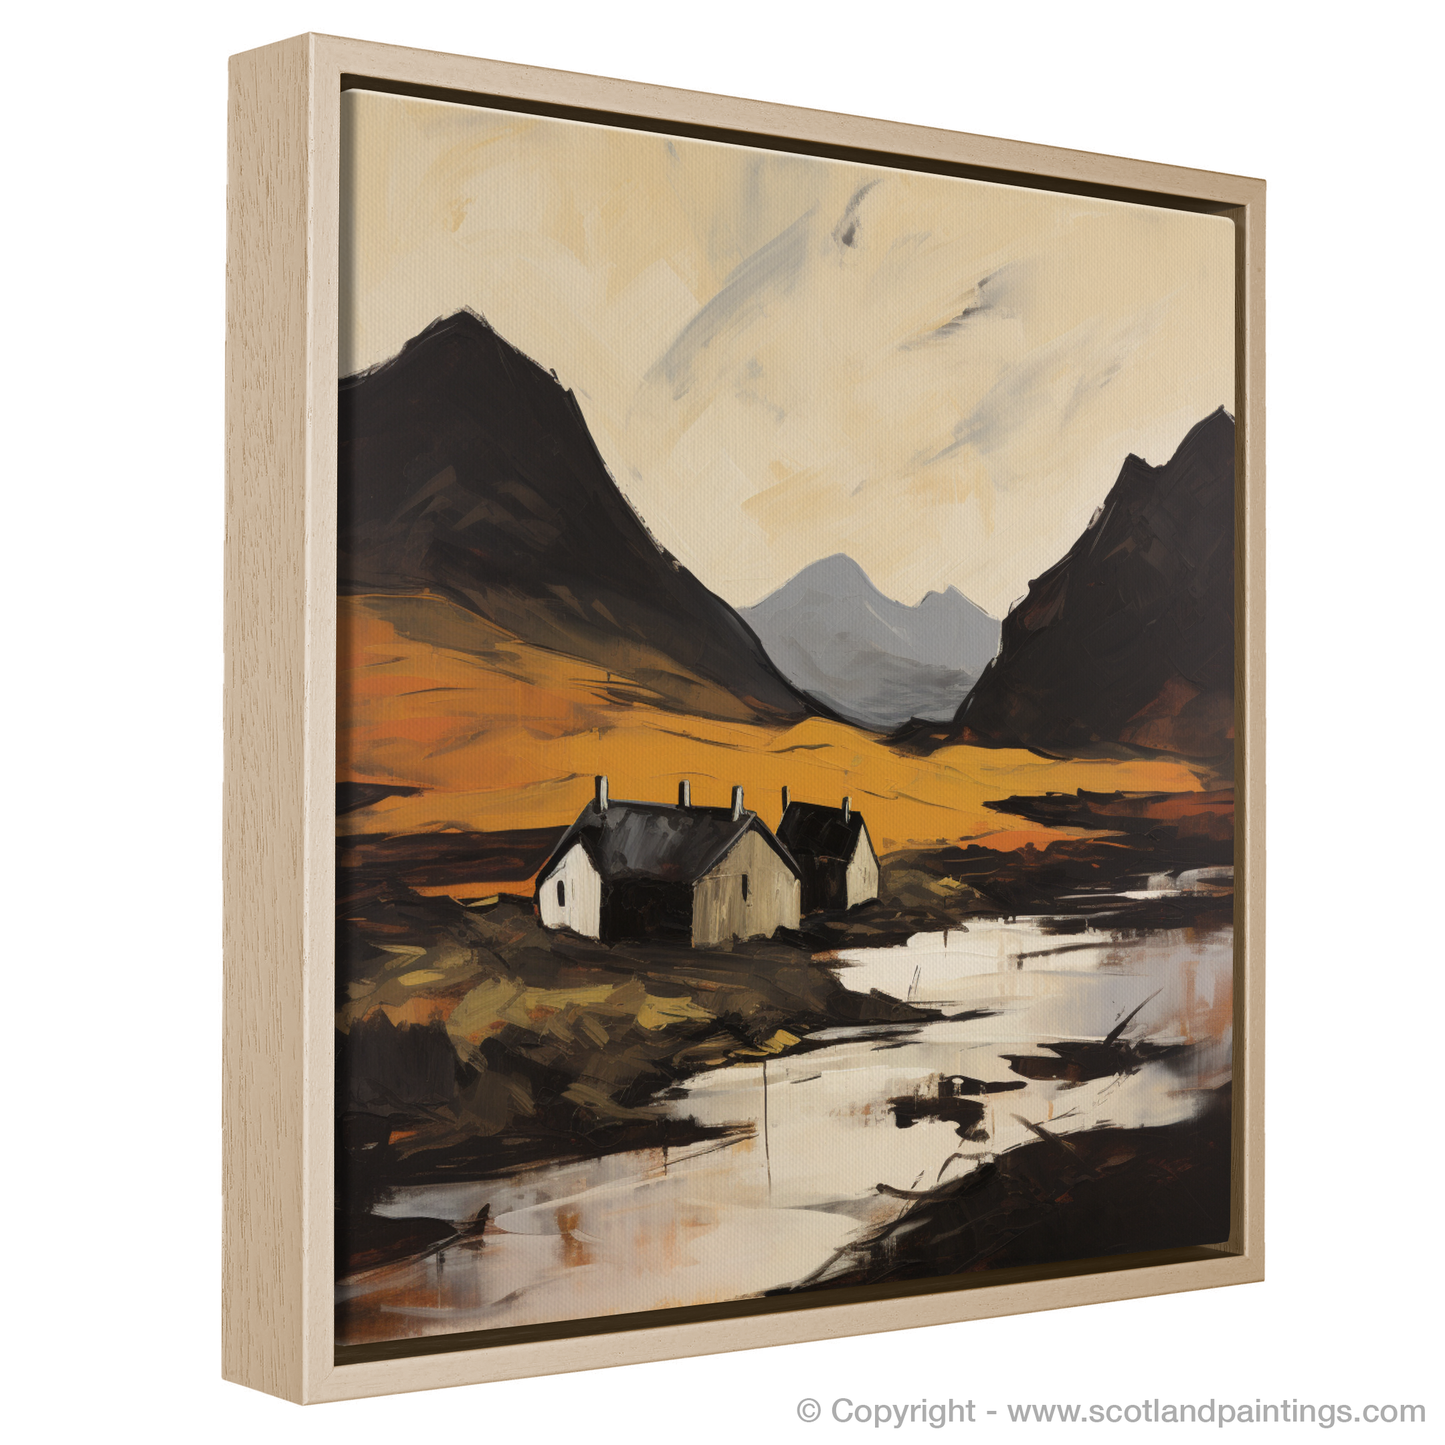 Painting and Art Print of Creag Leacach entitled "Embers of Dusk: A Vibrant Homage to Creag Leacach".